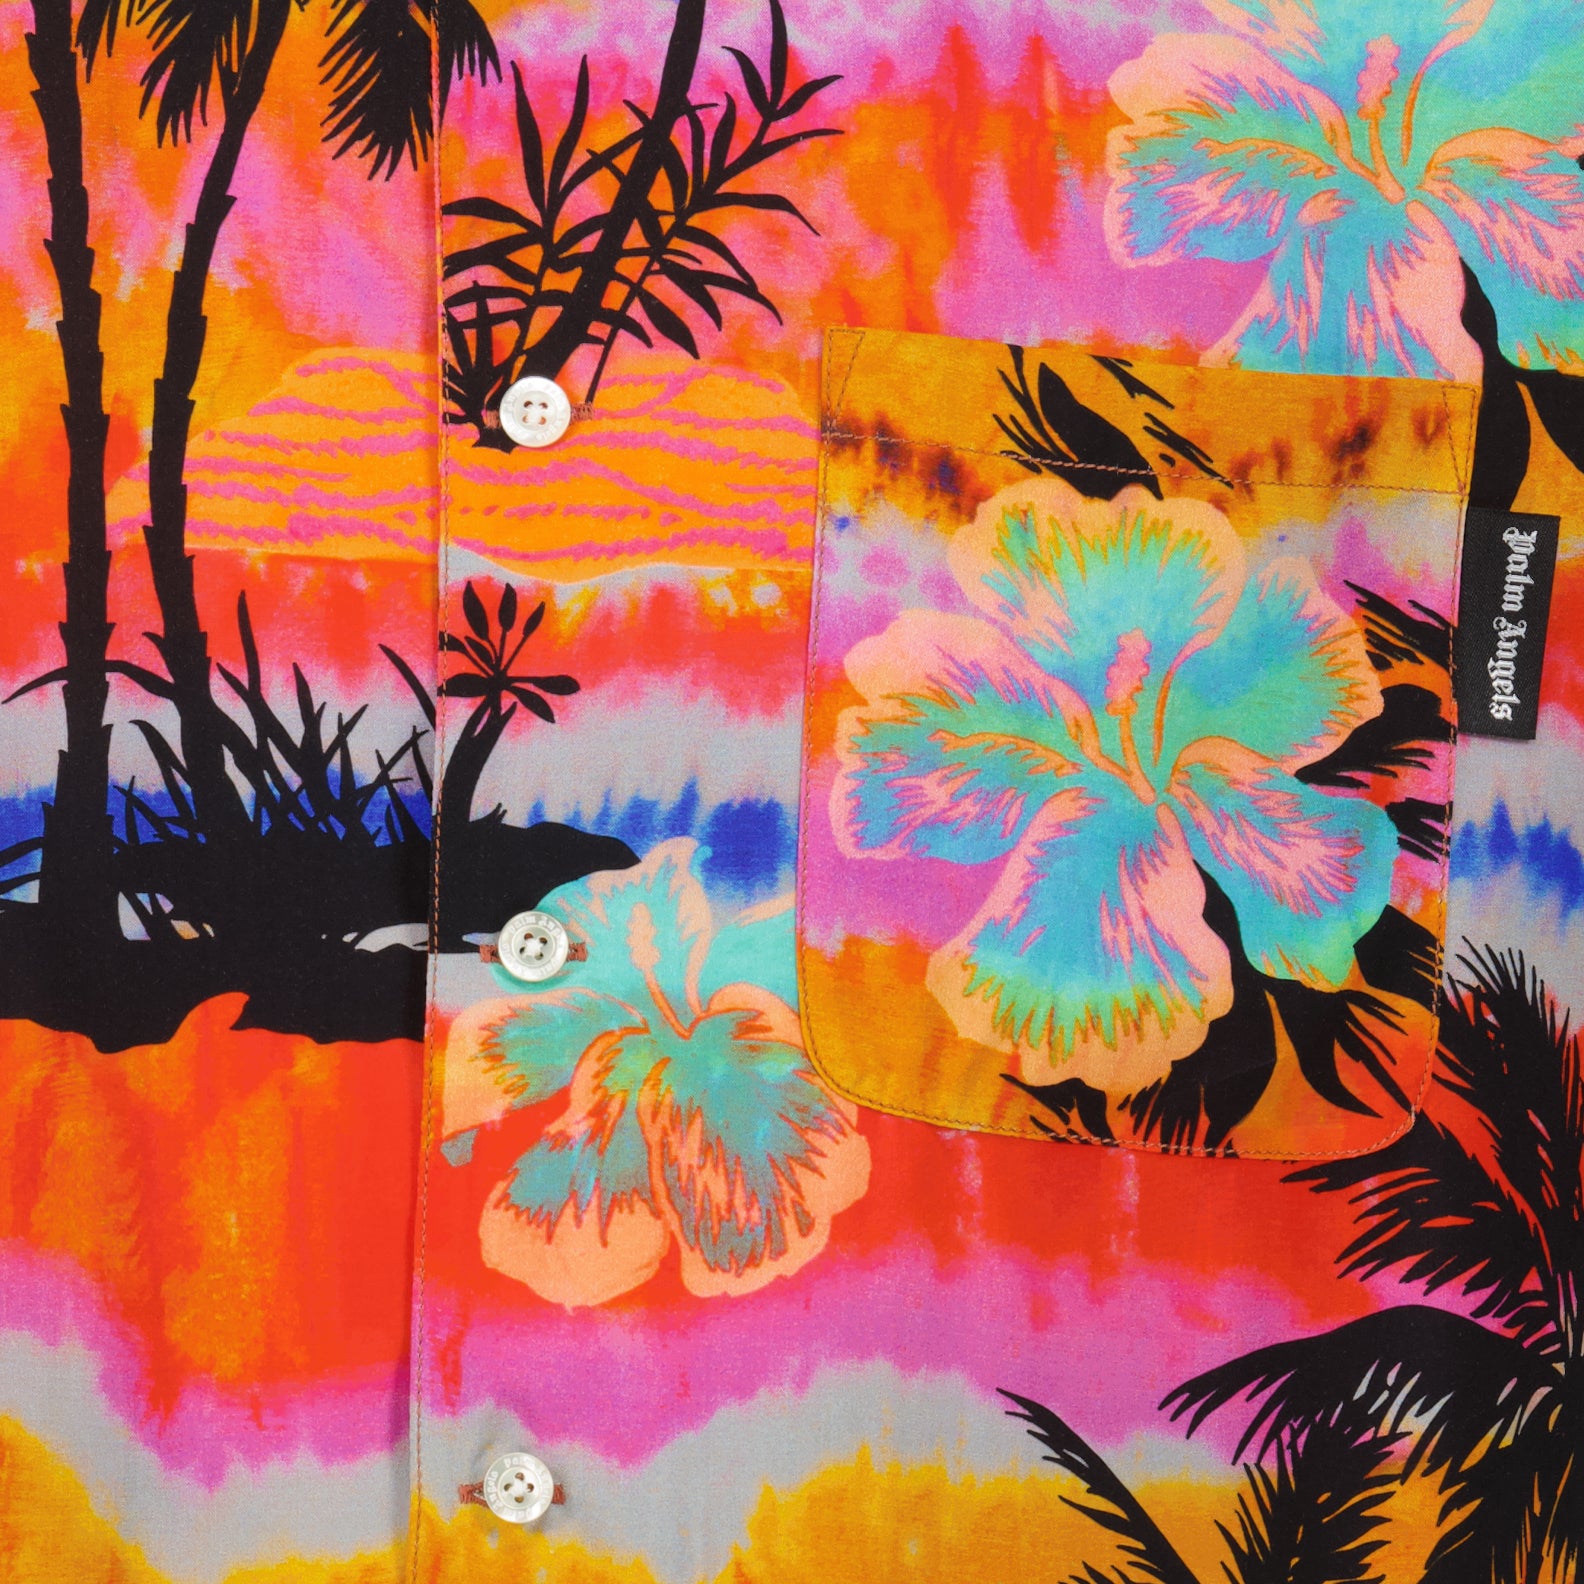 Chemise Psychedelic Palms